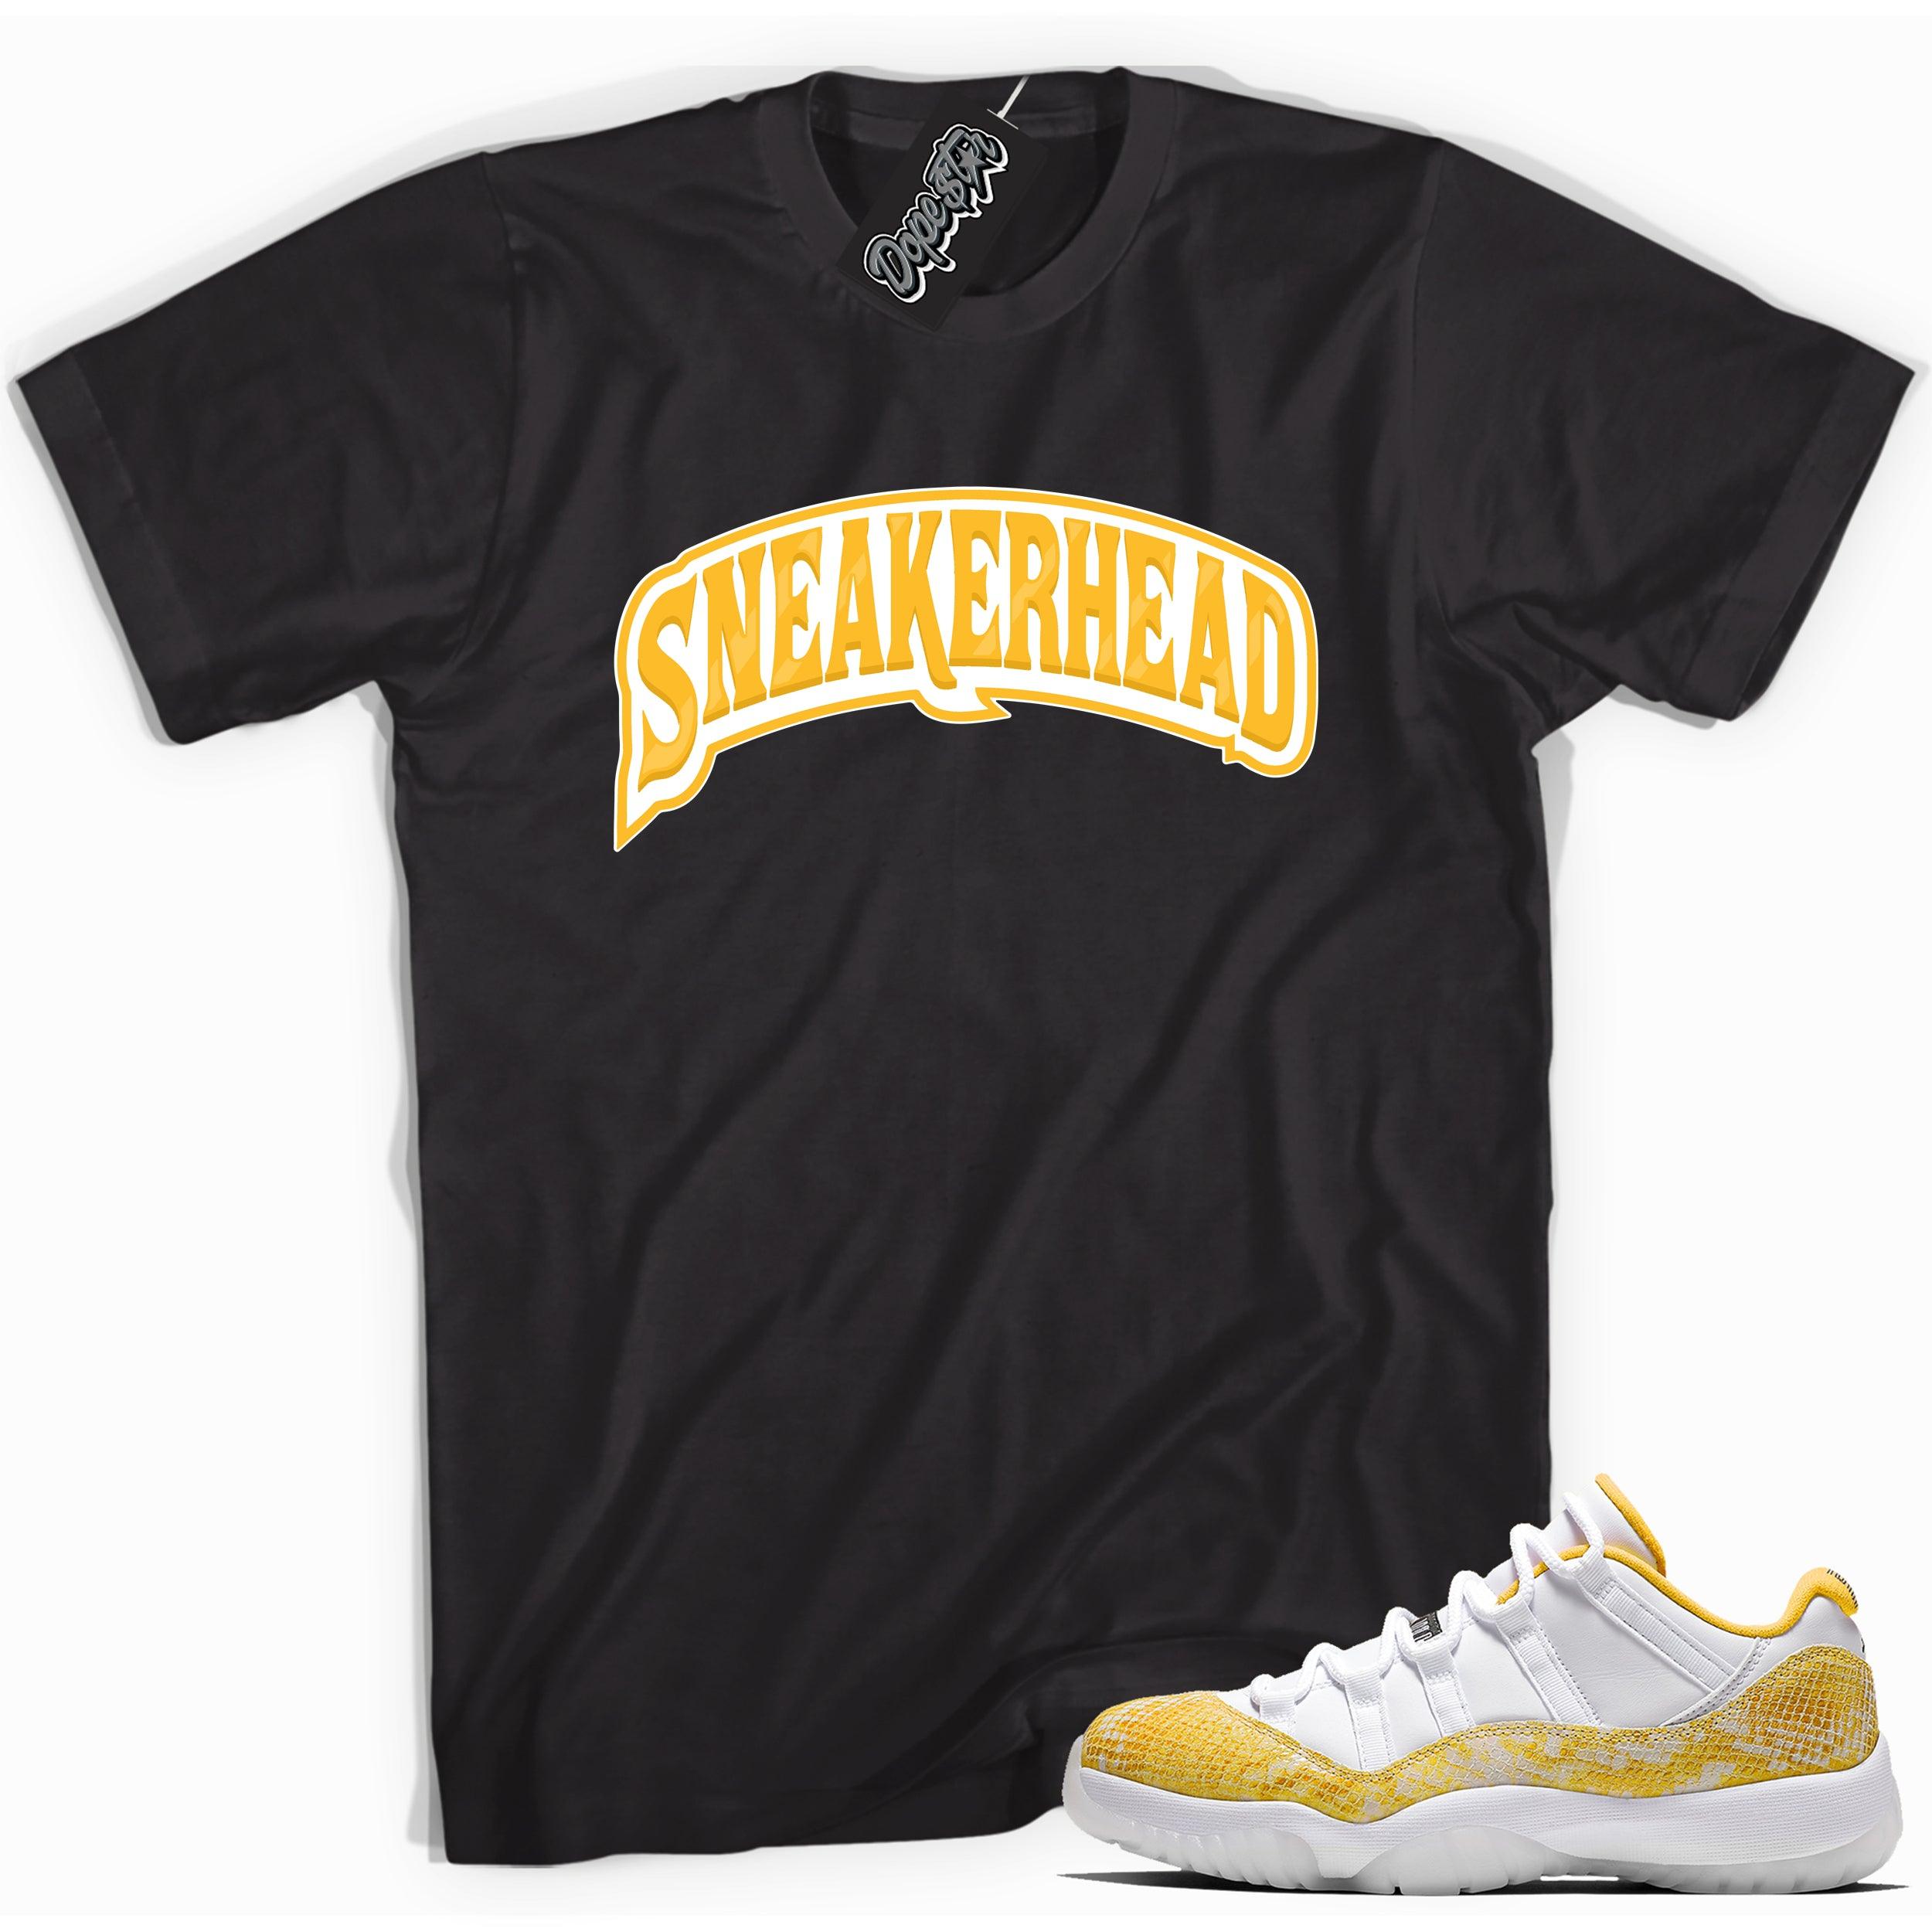 Cool black graphic tee with 'sneaker head' print, that perfectly matches  Air Jordan 11 Retro Low Yellow Snakeskin sneakers